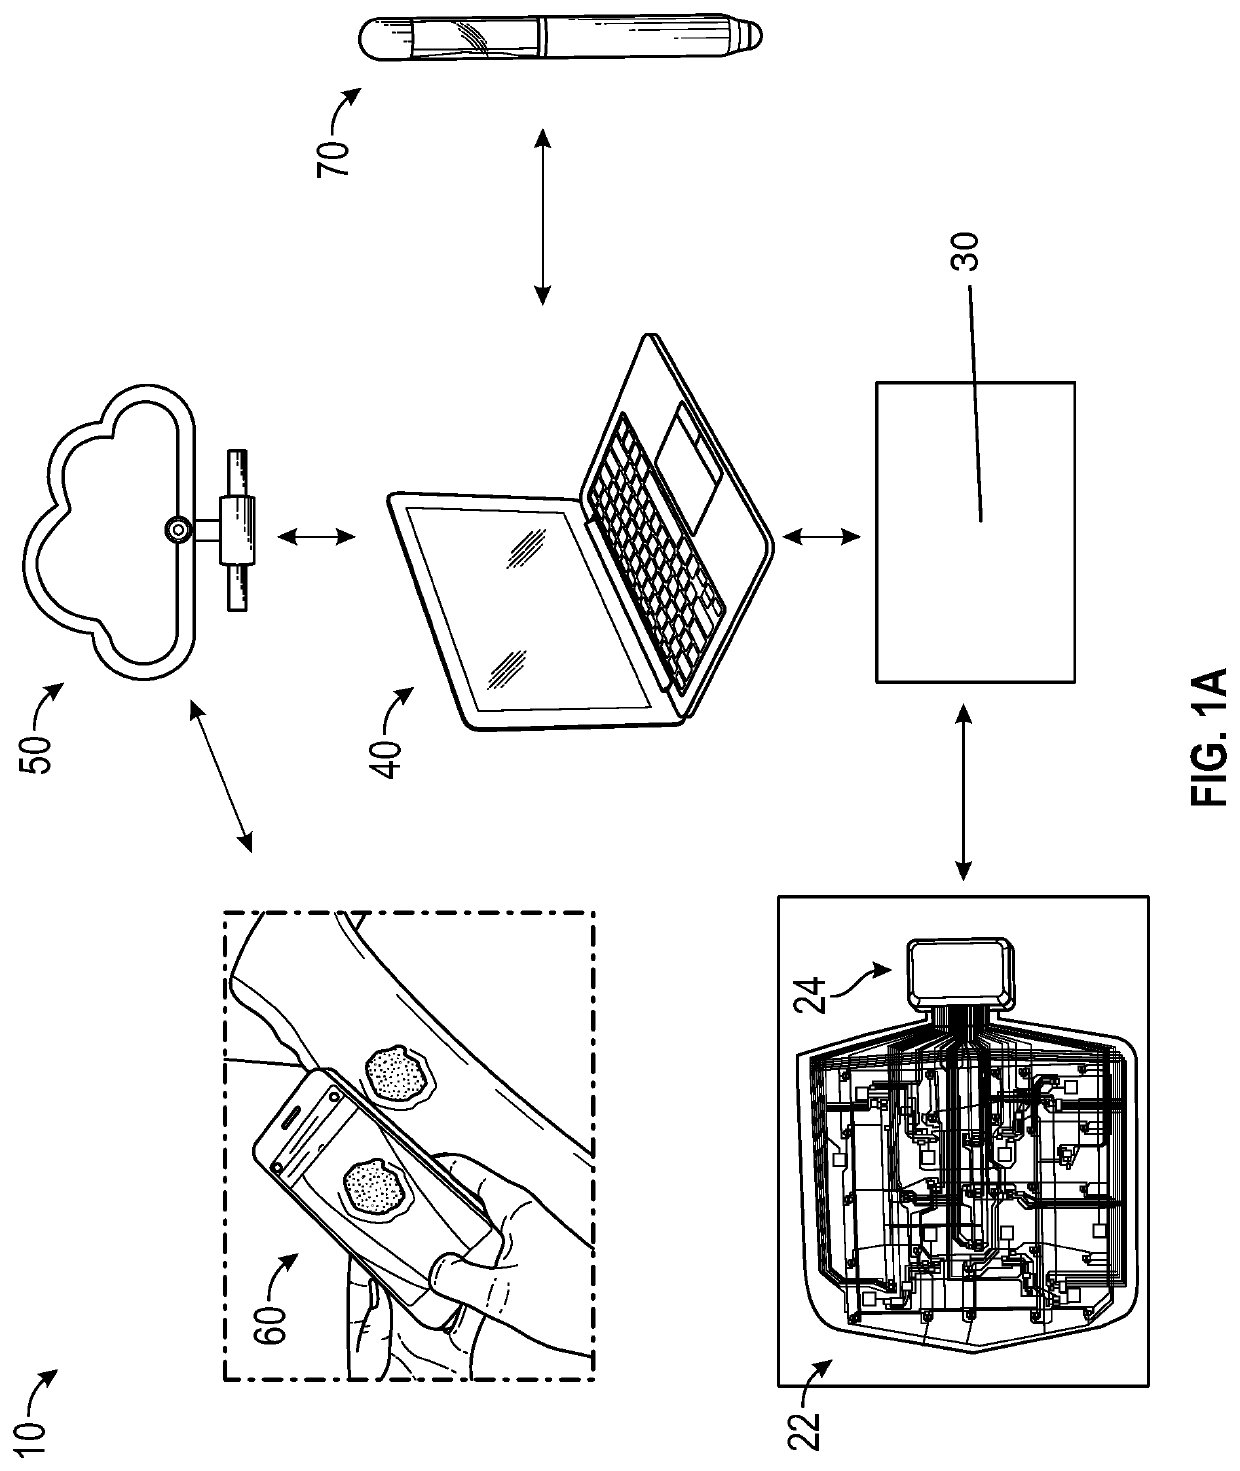 Integrated sensor enabled wound monitoring and/or therapy dressings and systems